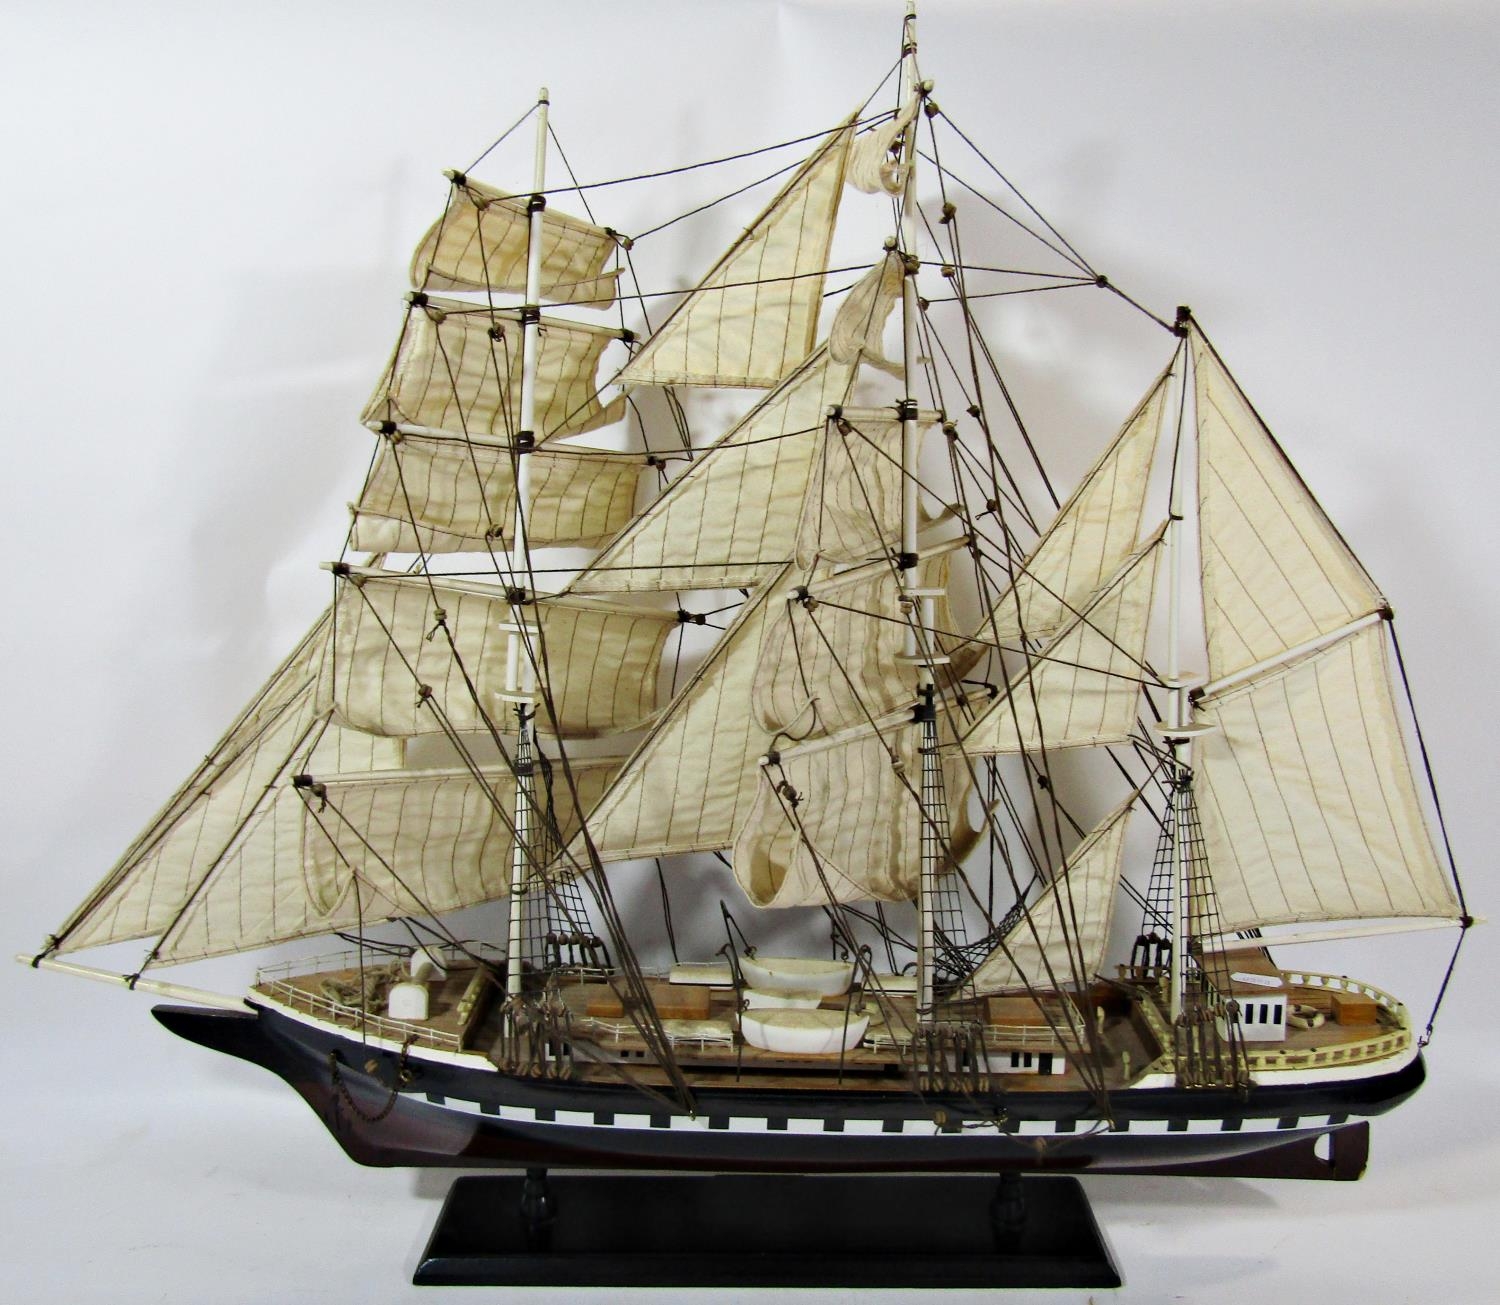 A wooden model of a three masted sailing ship in full sail, on a wooden stand, 79cm long x 67cm high